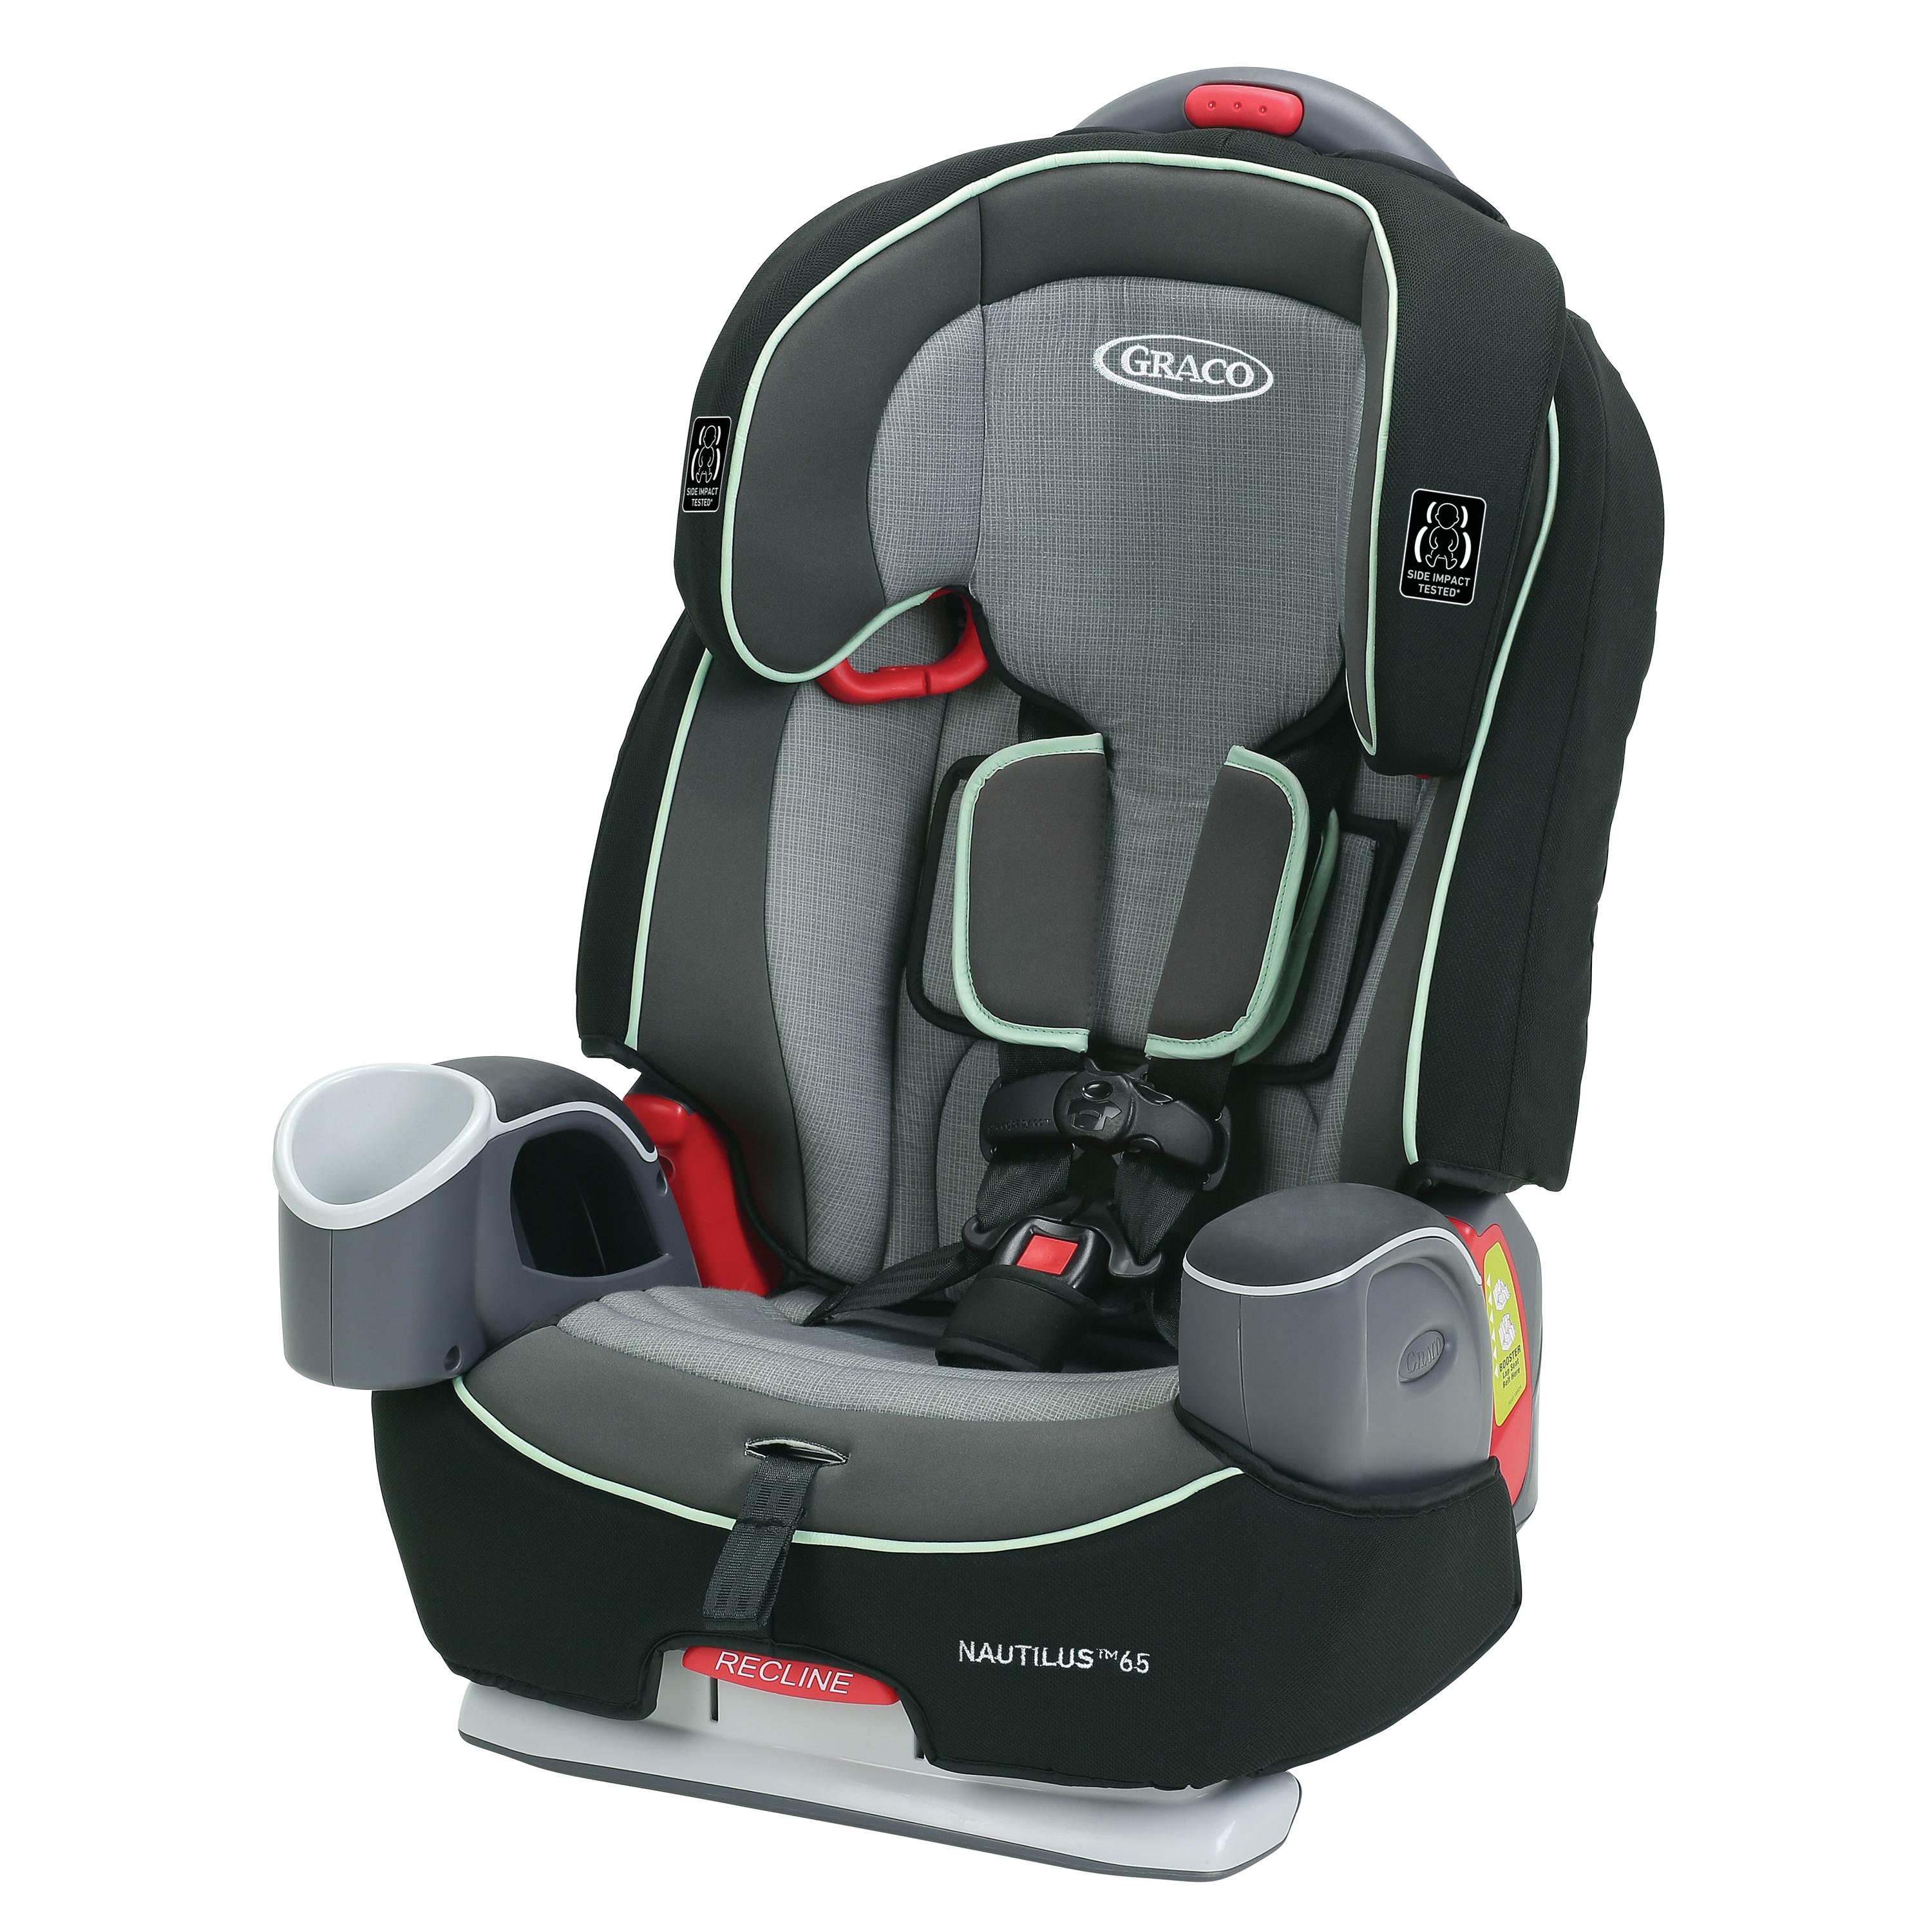 Graco Nautilus 65 3-in-1 Harness Booster Car Seat, Landry Lime - image 1 of 8